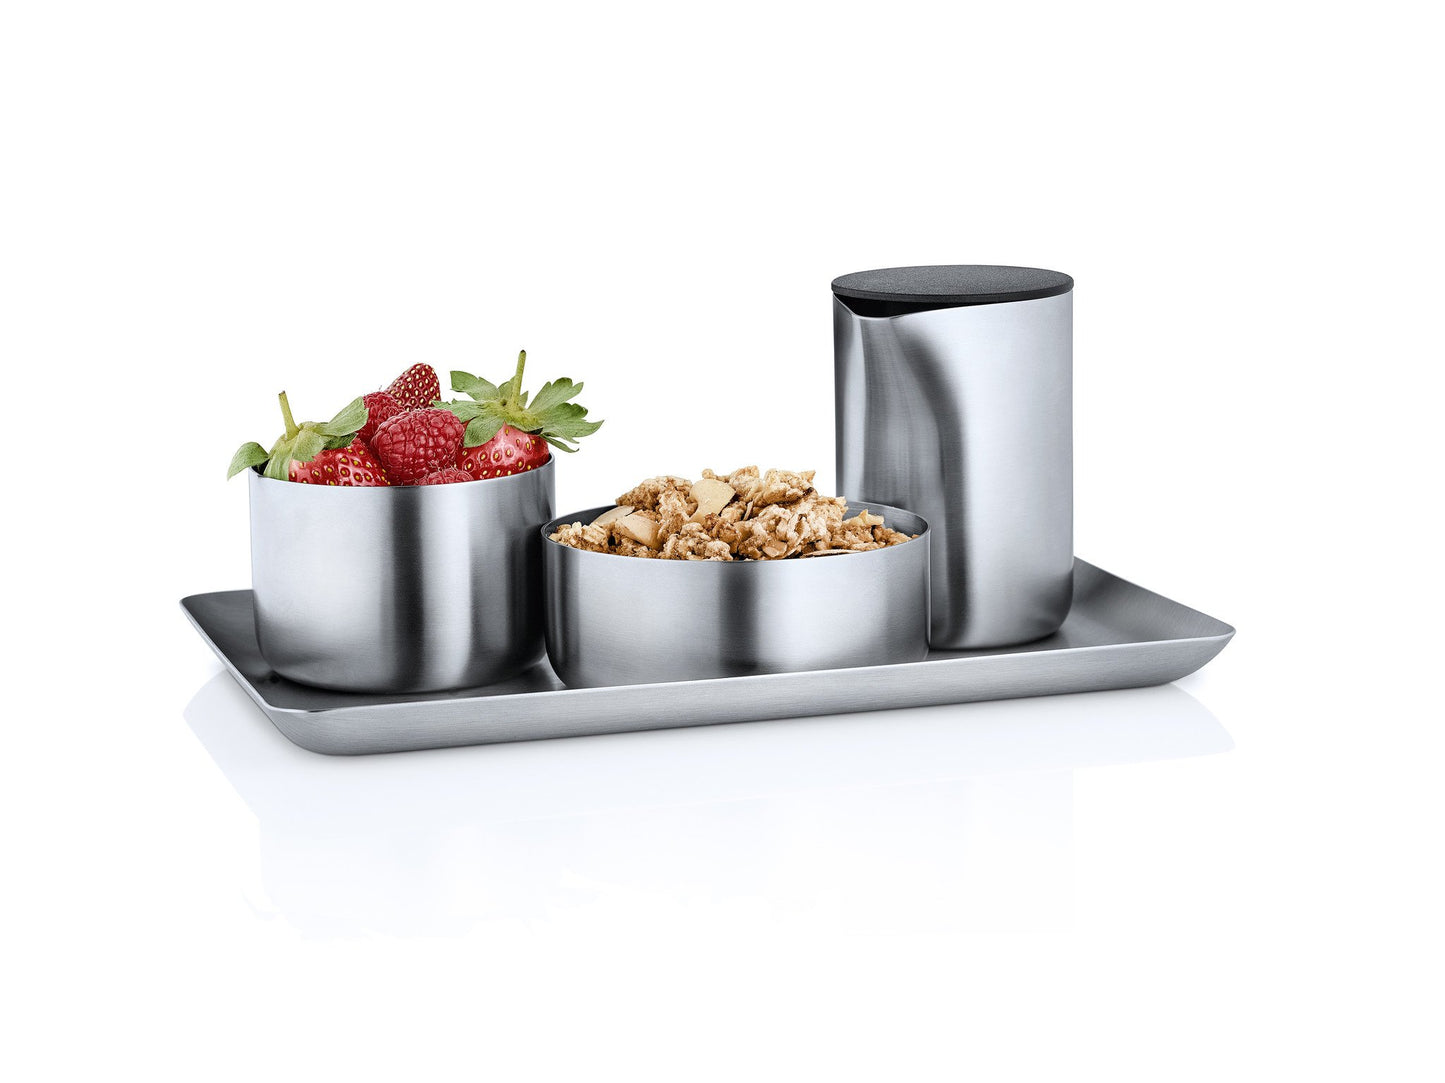 Blomus Basic Tray Stainless Steel 5x9 inches